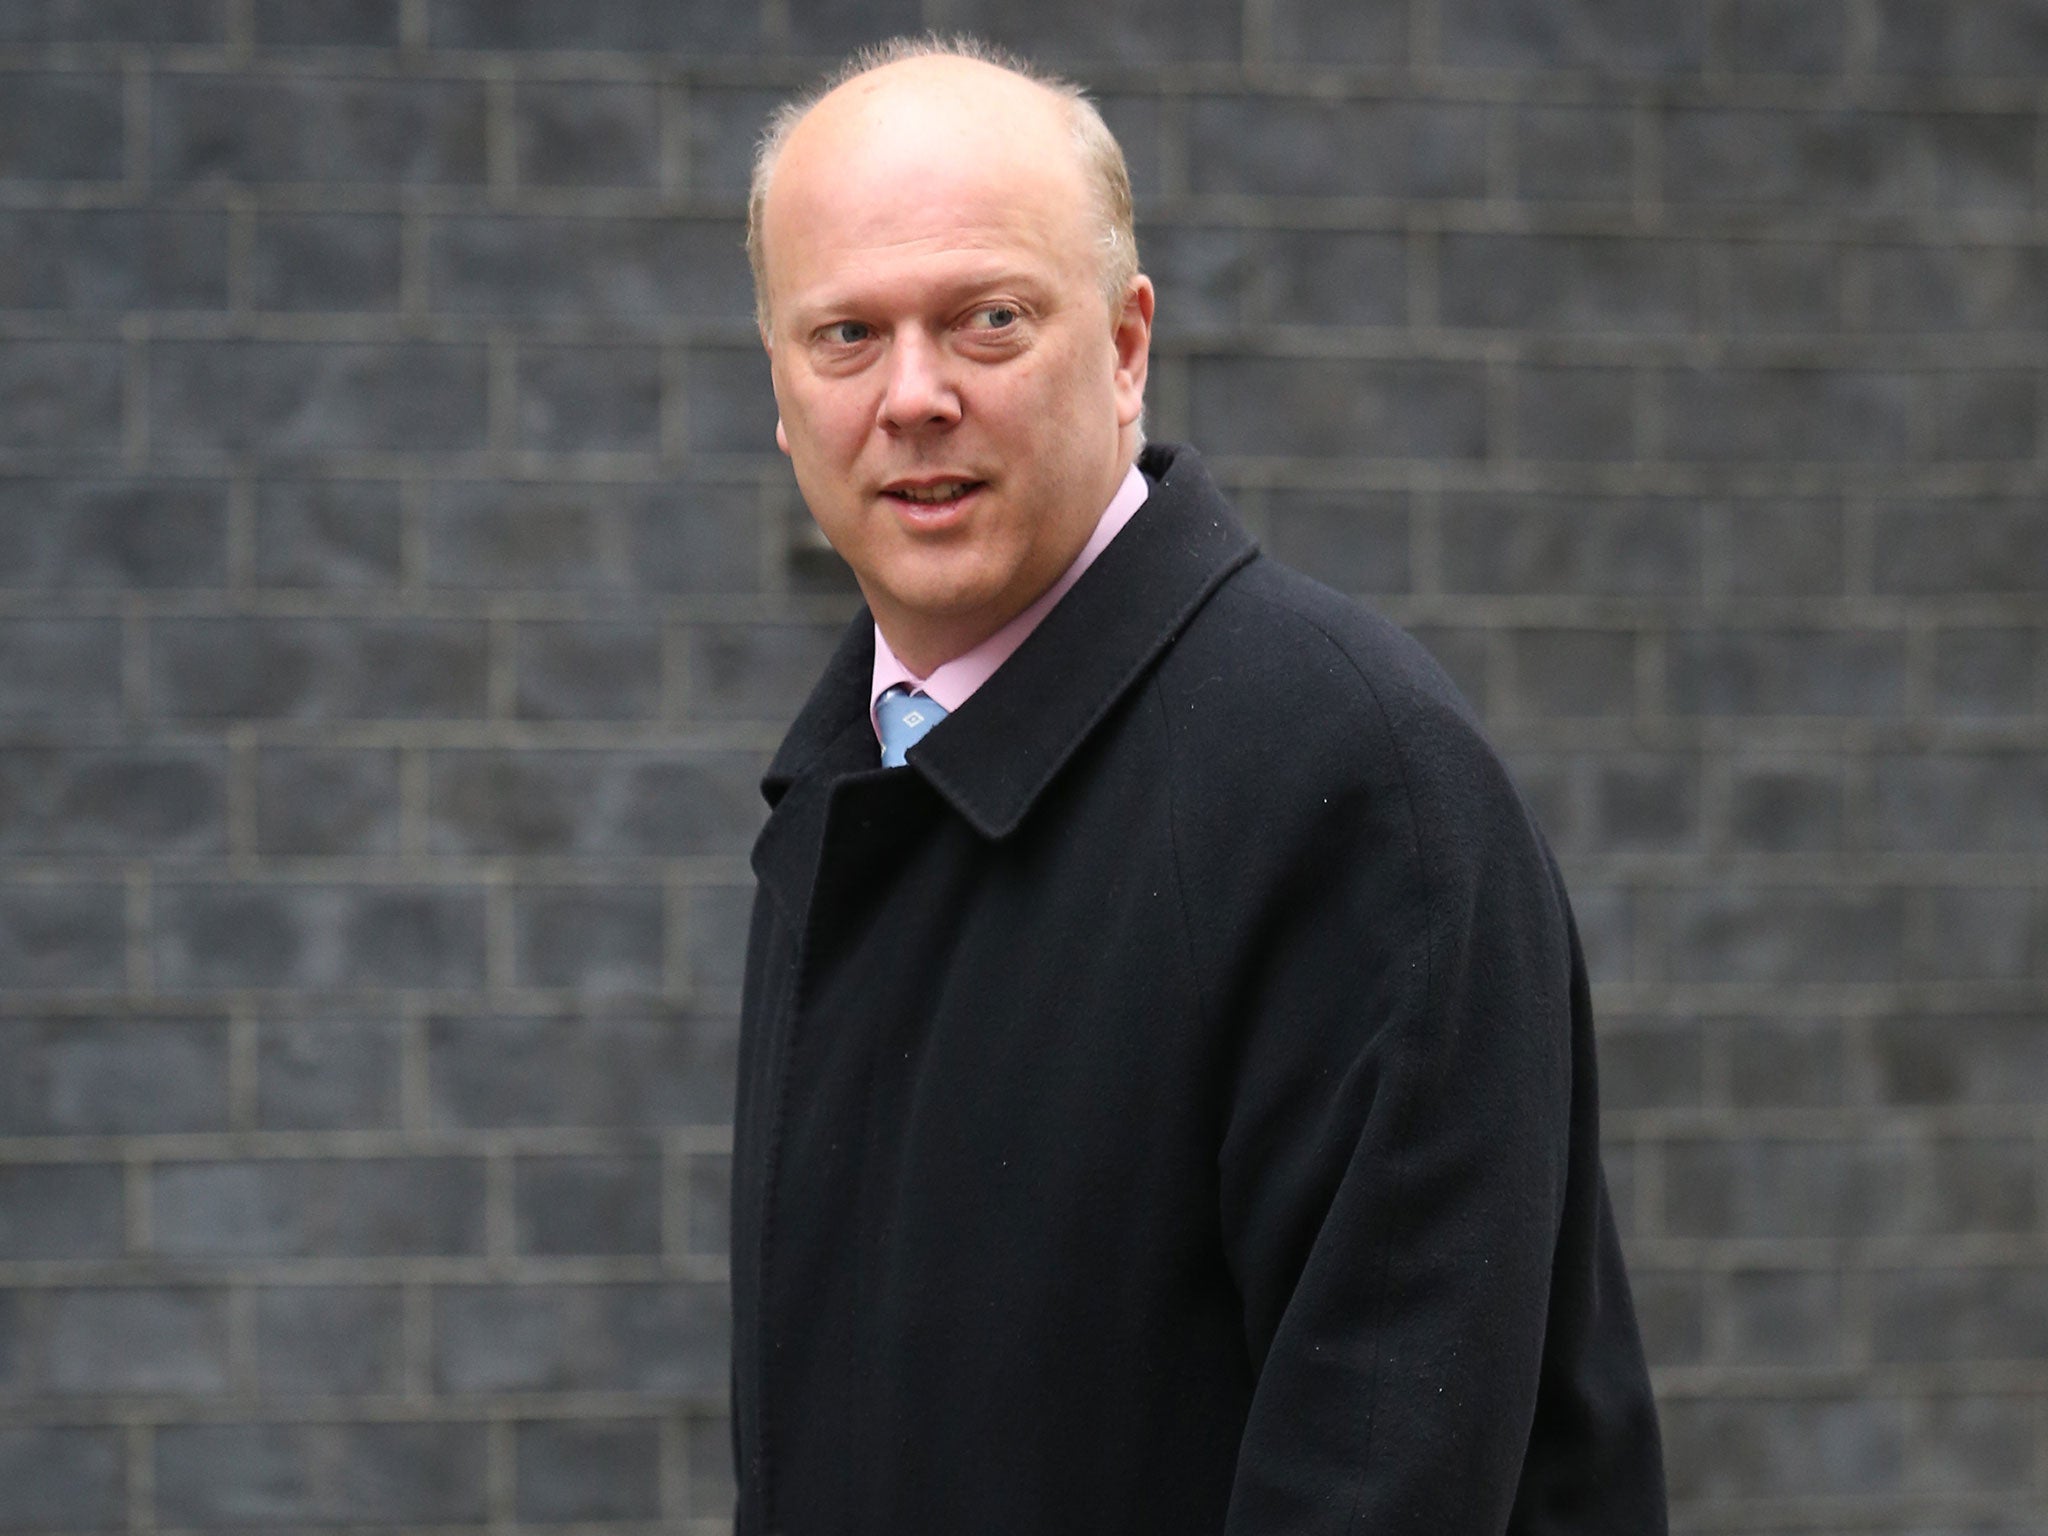 Chris Grayling backtracked after ministers were warned that as many as 20 Tories were preparing to defy the whips and oppose the legislation